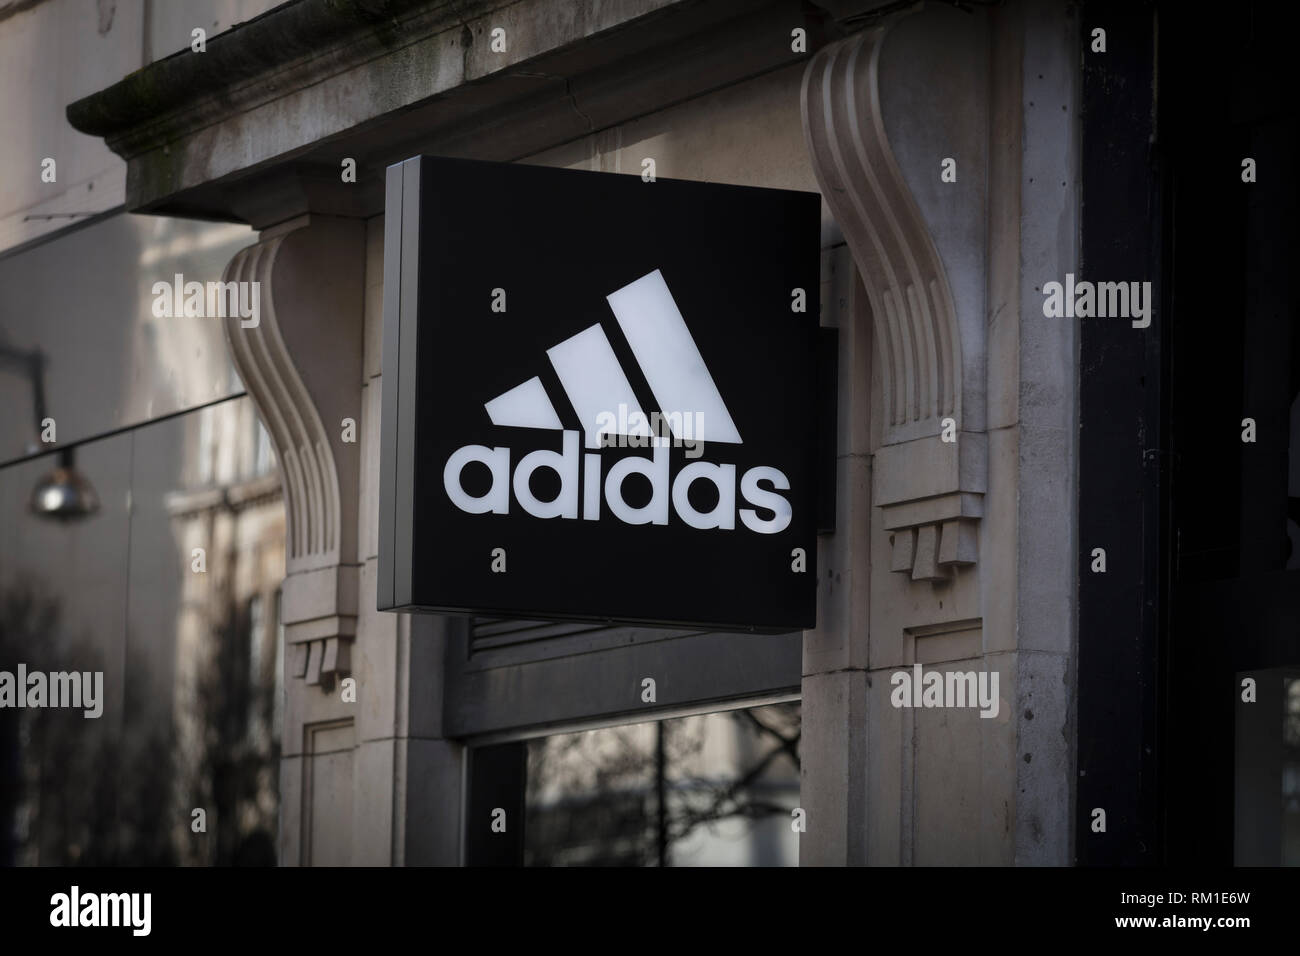 London, London, Kingdom, 7th February 2018, A sign and logo for an adidas footwear sports shop Stock Photo Alamy